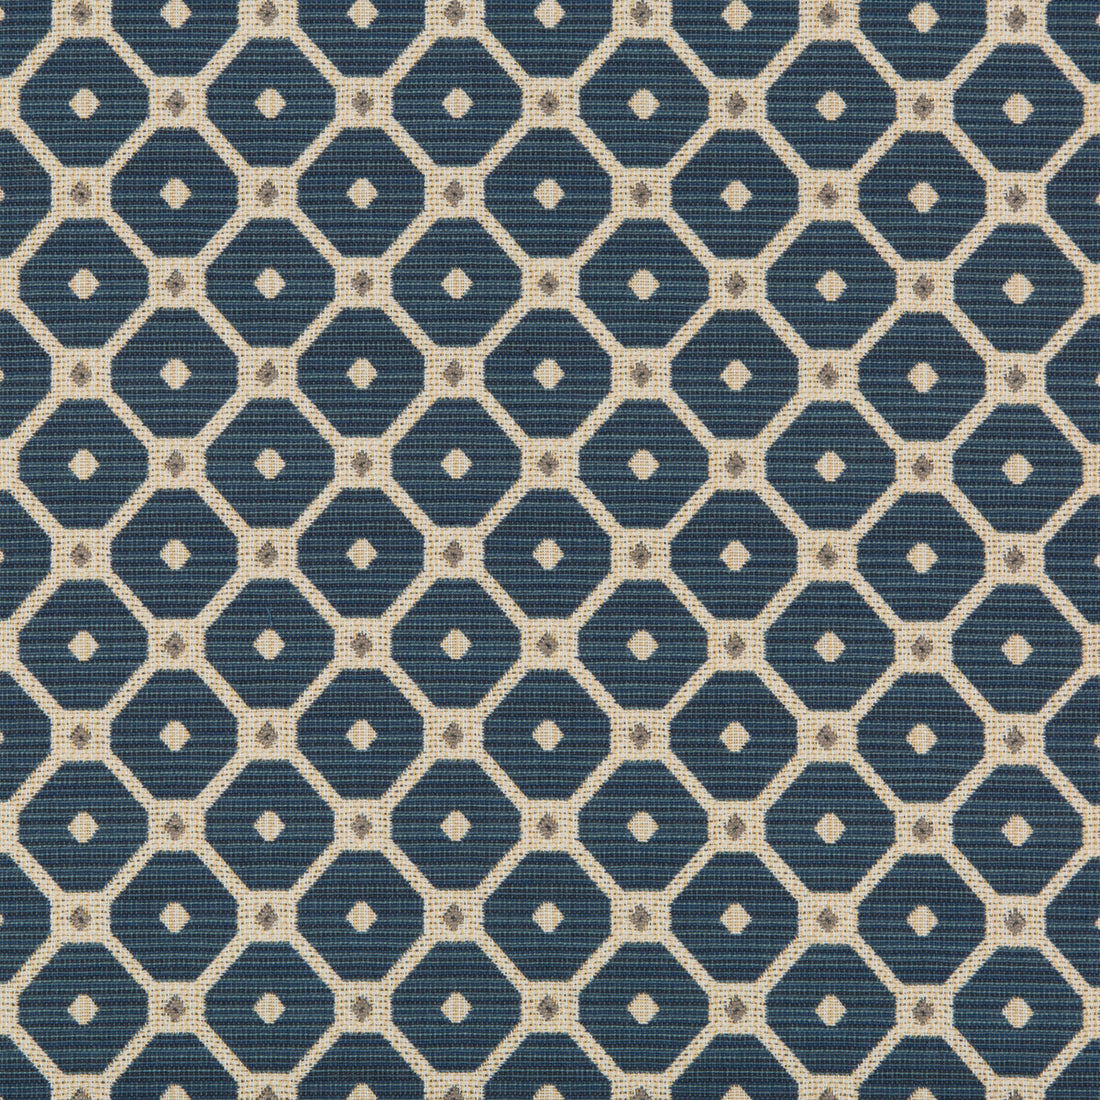 Kravet Contract fabric in 35043-5 color - pattern 35043.5.0 - by Kravet Contract in the Incase Crypton Gis collection